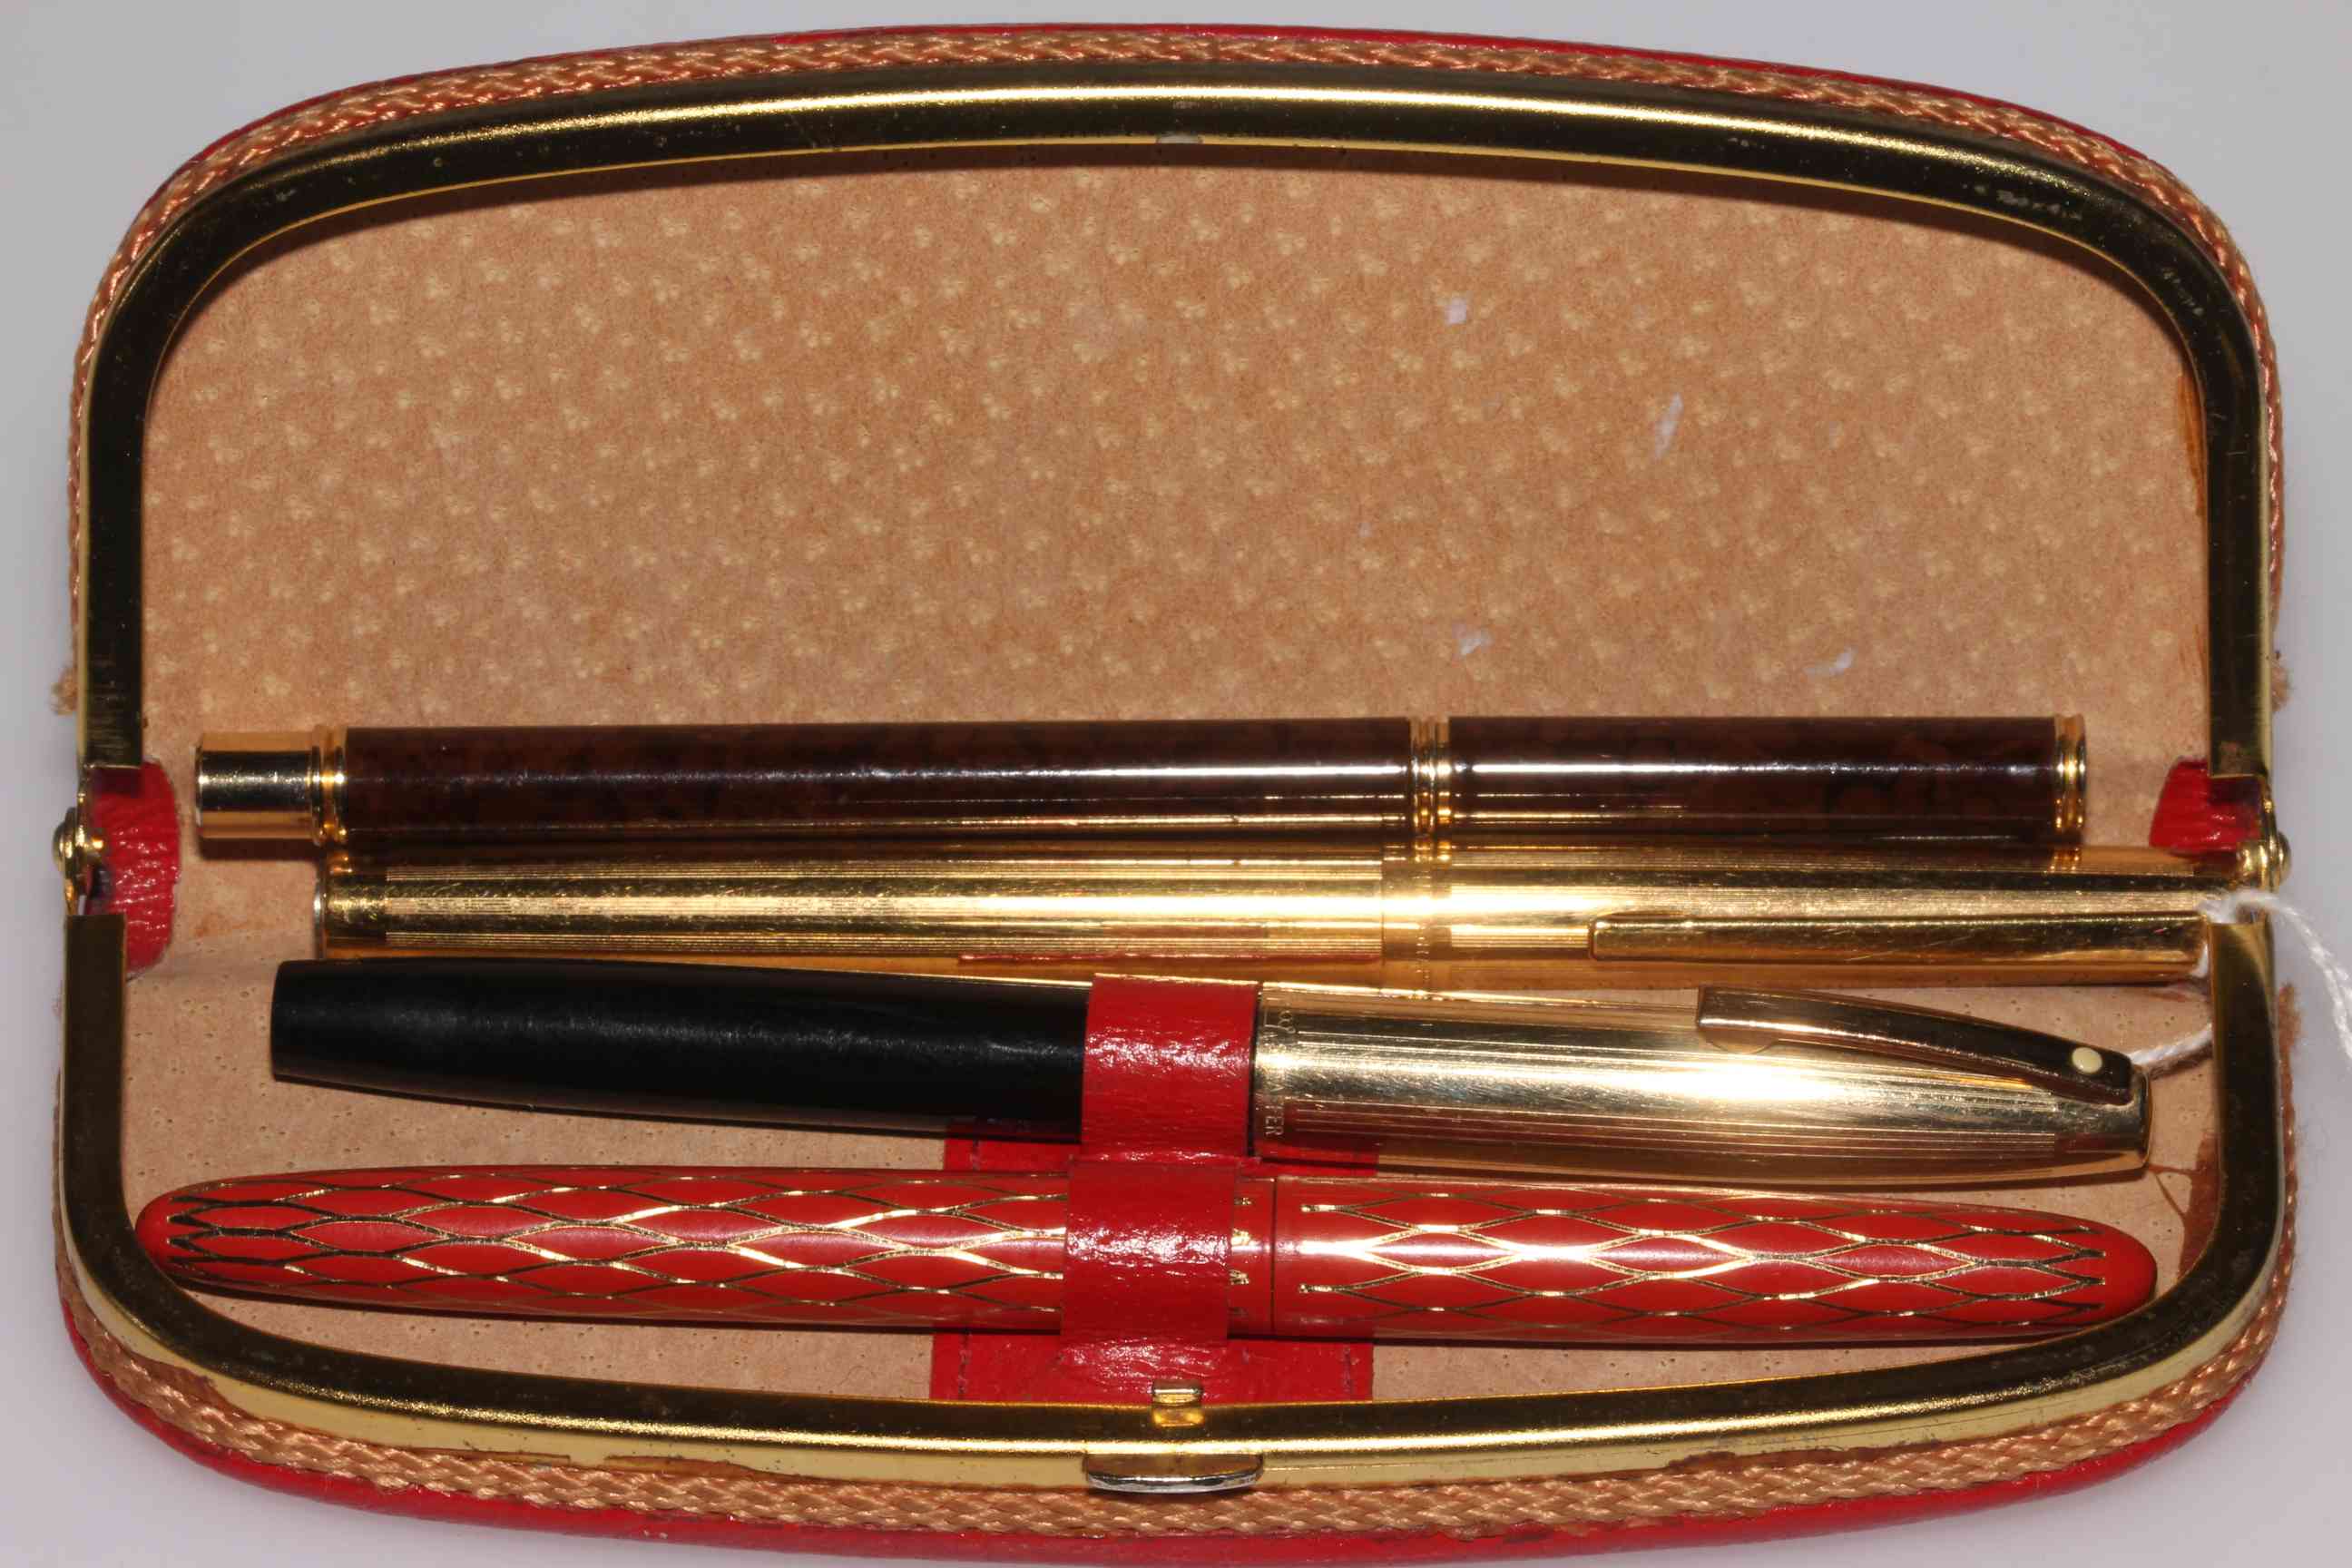 Two Schaeffer fountain and cartridge pens, Monte Grappa and other pen (4).